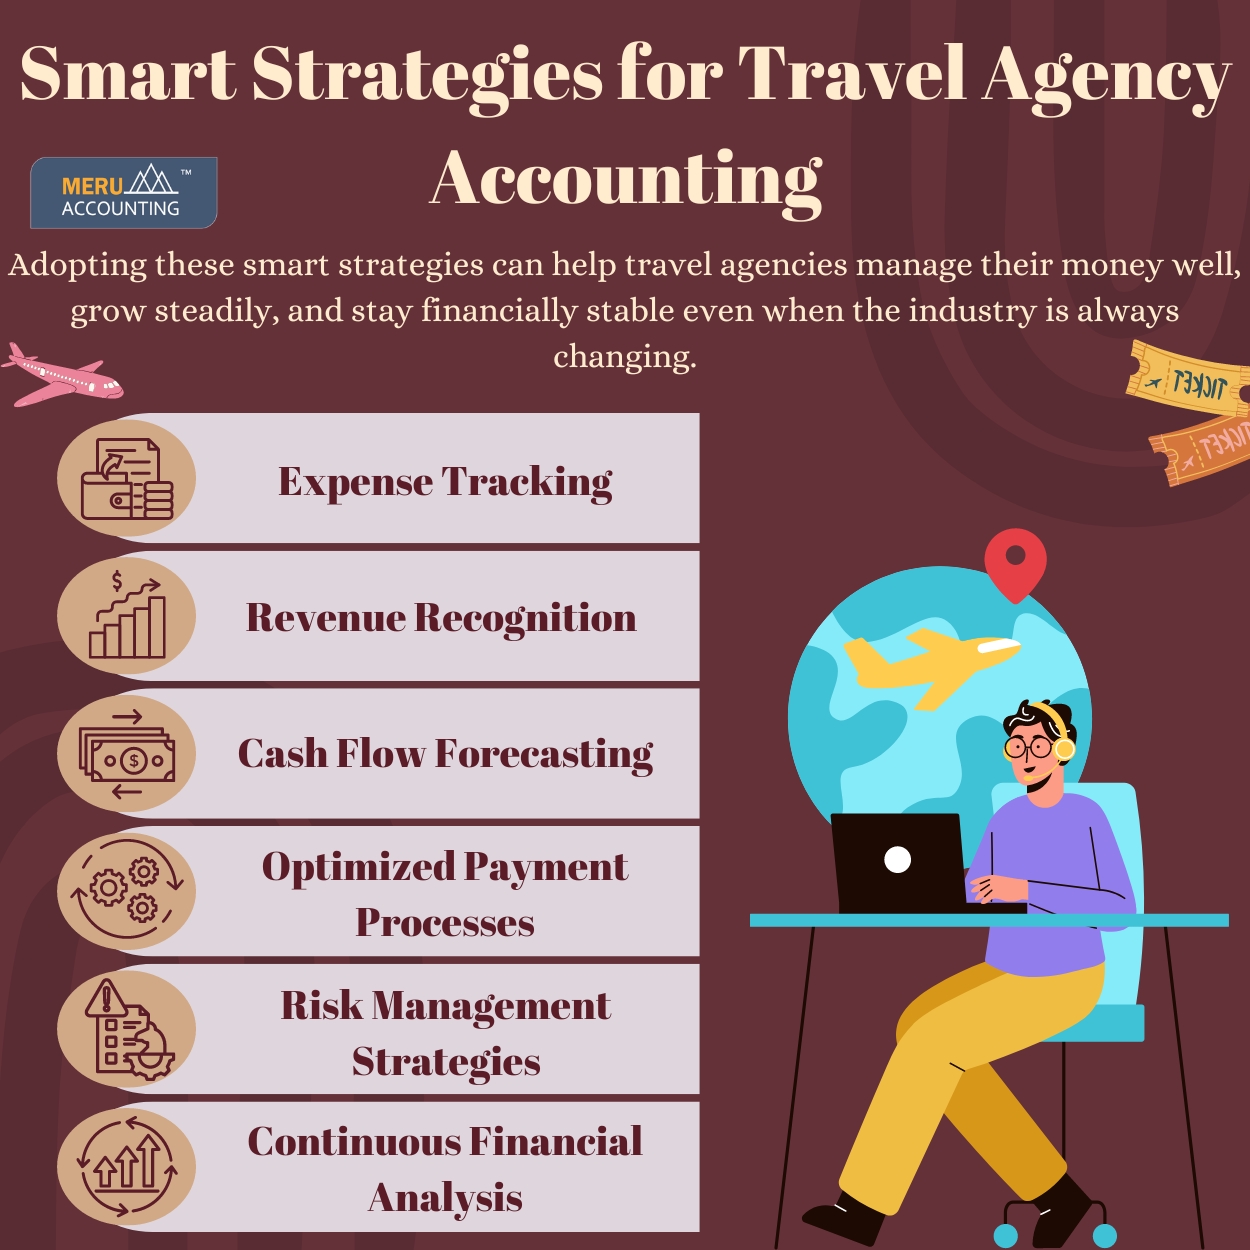 Smart Strategies for Travel Agency Accounting 